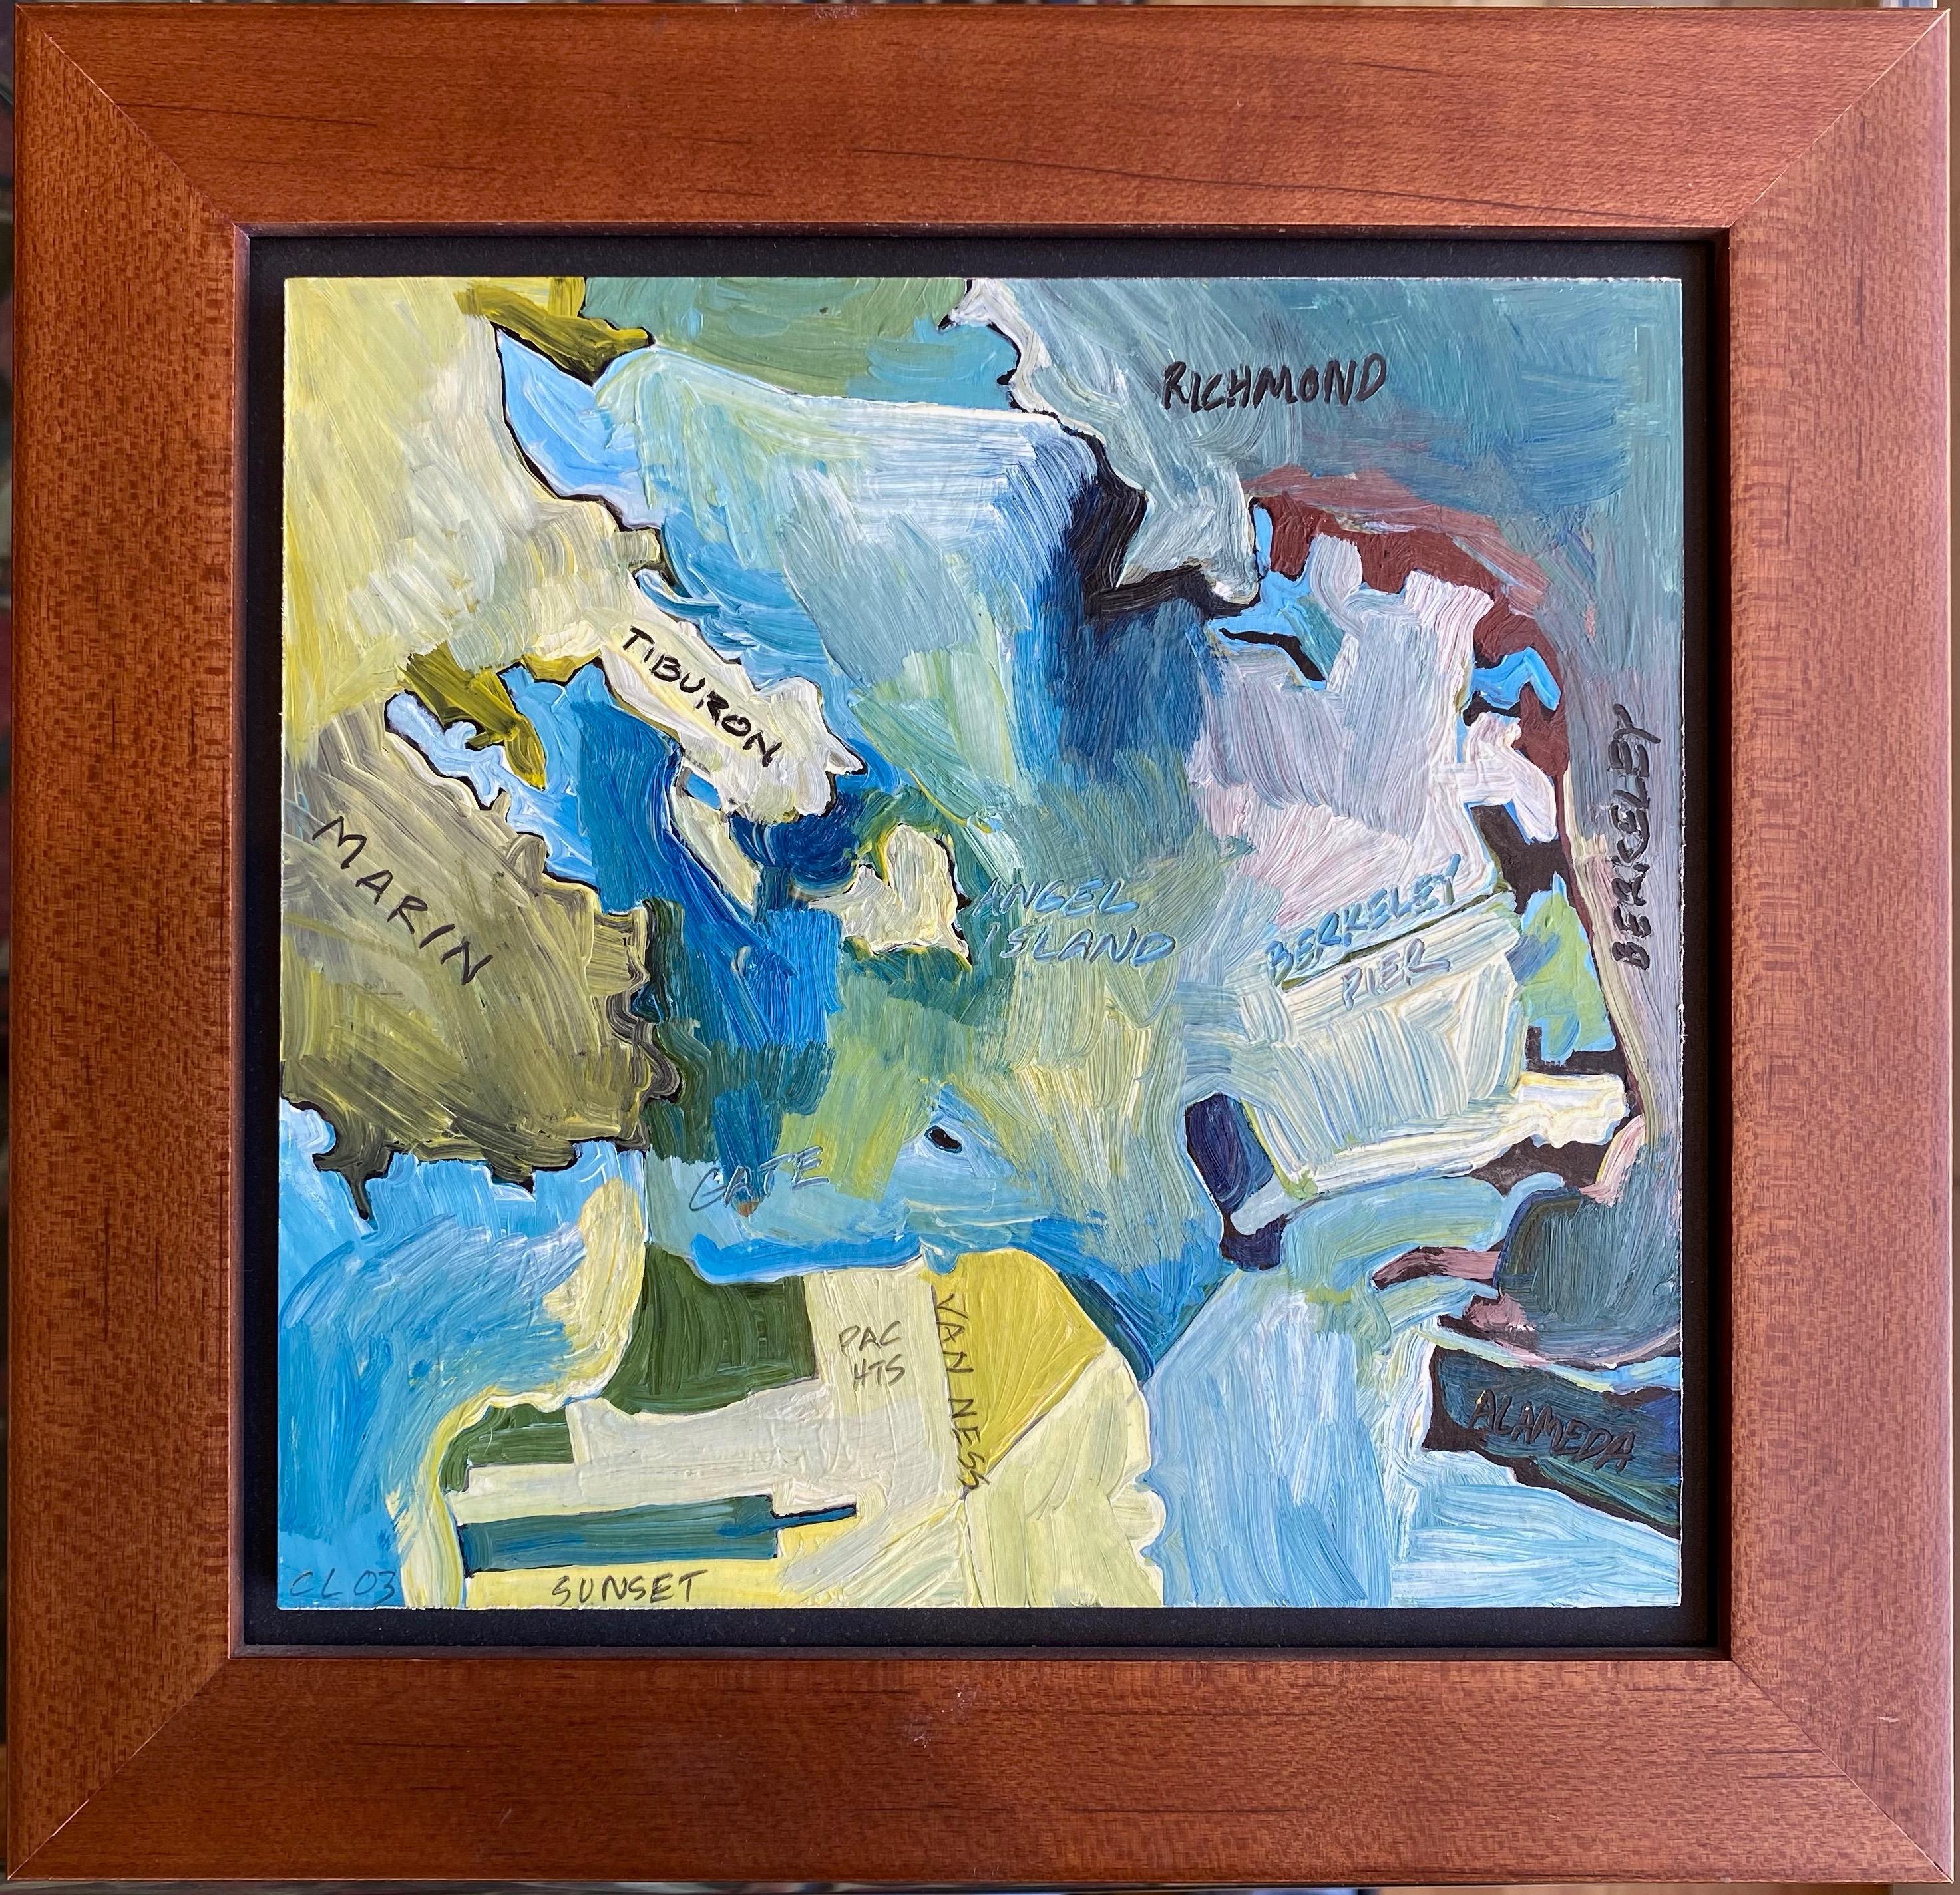 A small 2003 expressionist oil painting on board depicting the San Francisco Bay Area by Los Angeles-based artist Chase Langford, titled 